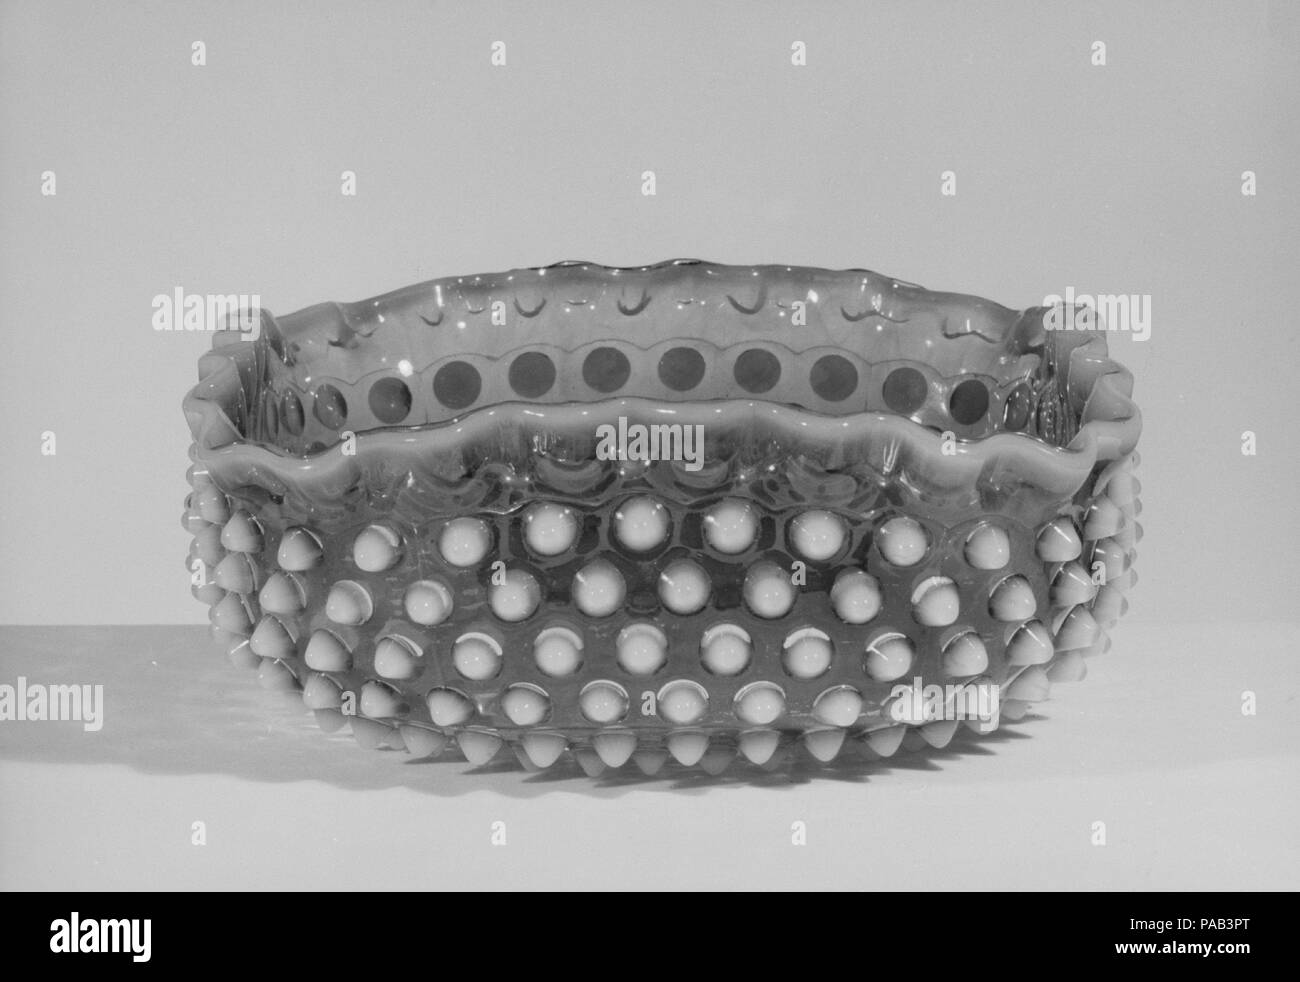 Hobnail Fruit Bowl. Culture: American. Dimensions: H. 3 1/4 in. (8.3 cm); Diam. 8 1/4 in. (21 cm). Maker: Probably Hobbs, Brockunier and Company (1863-1891). Date: after 1886. Museum: Metropolitan Museum of Art, New York, USA. Stock Photo